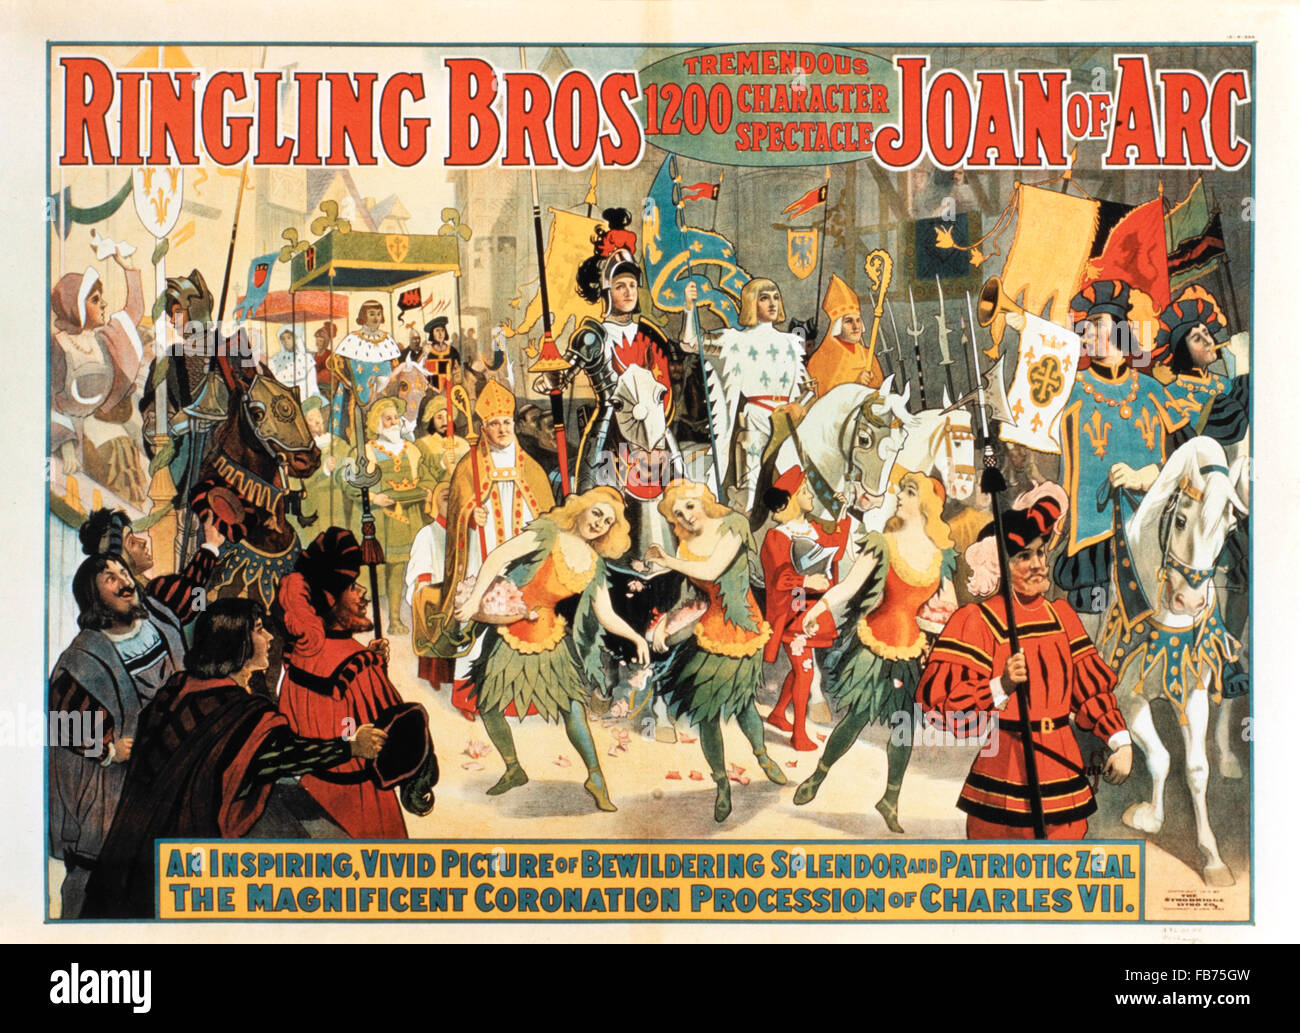 Ringling Brothers, Tremendous 1200 Character Spectacle, Joan of Arc, The Magnificent Coronation Procession of Charles, VII, Circus Poster, circa 1912 Stock Photo